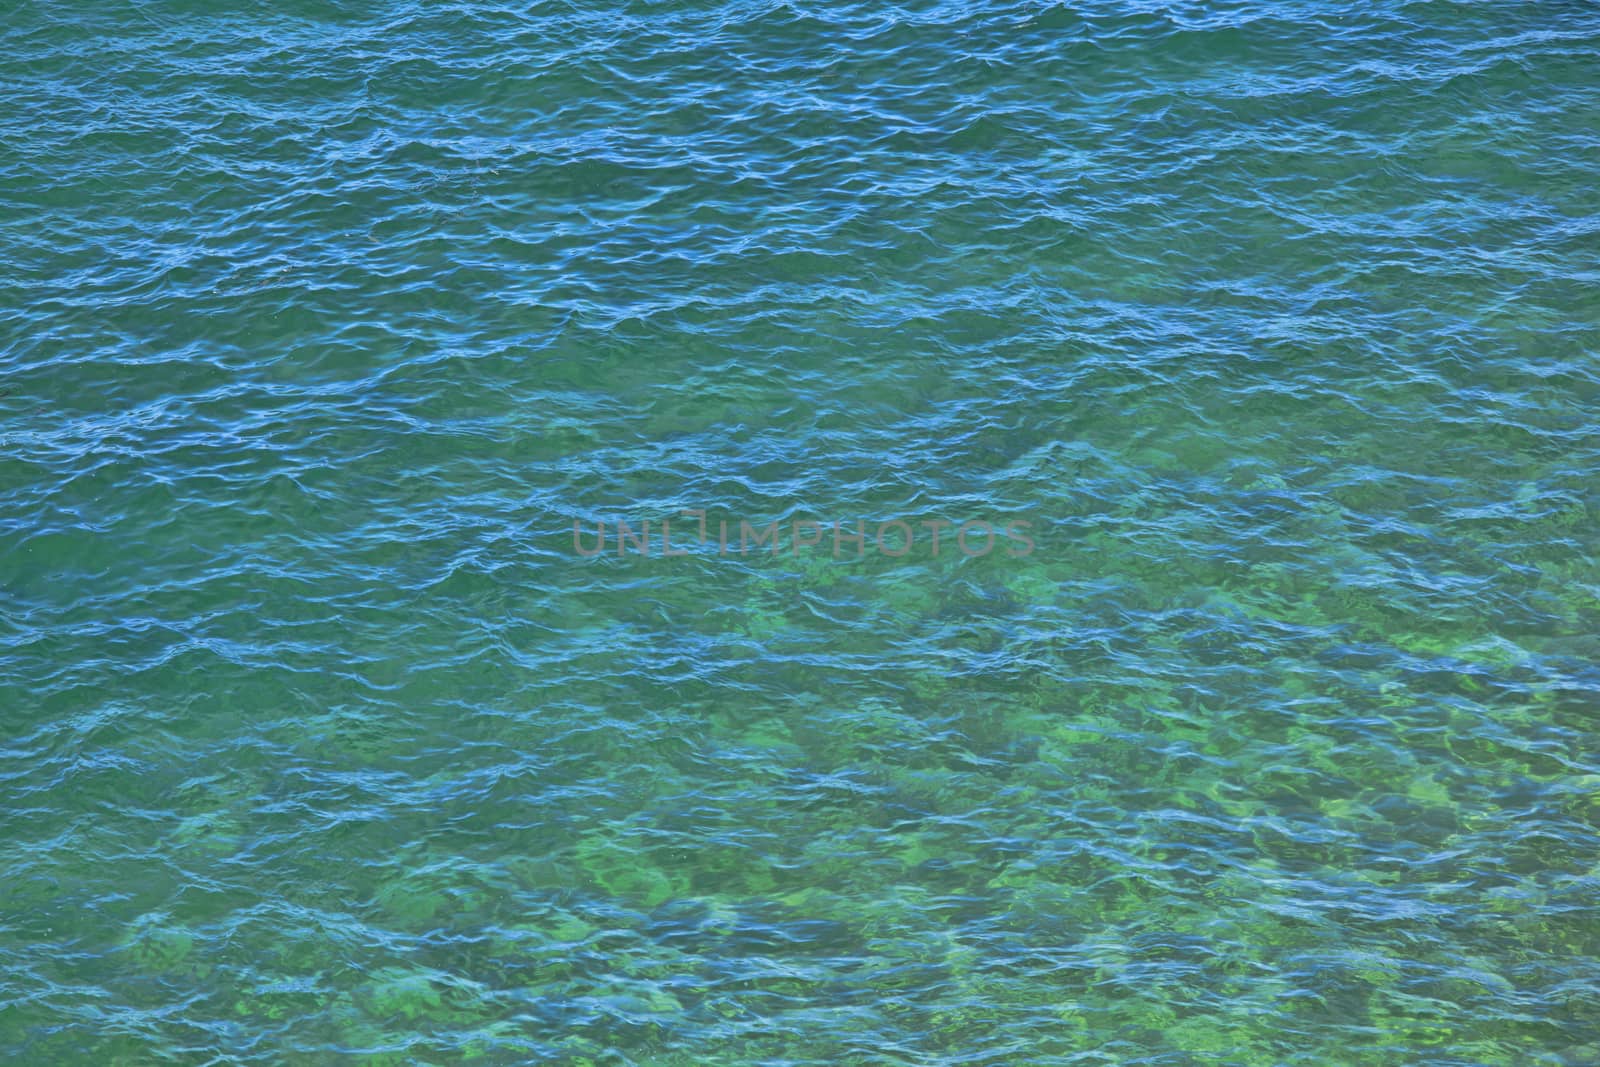 Water surface with small waves 